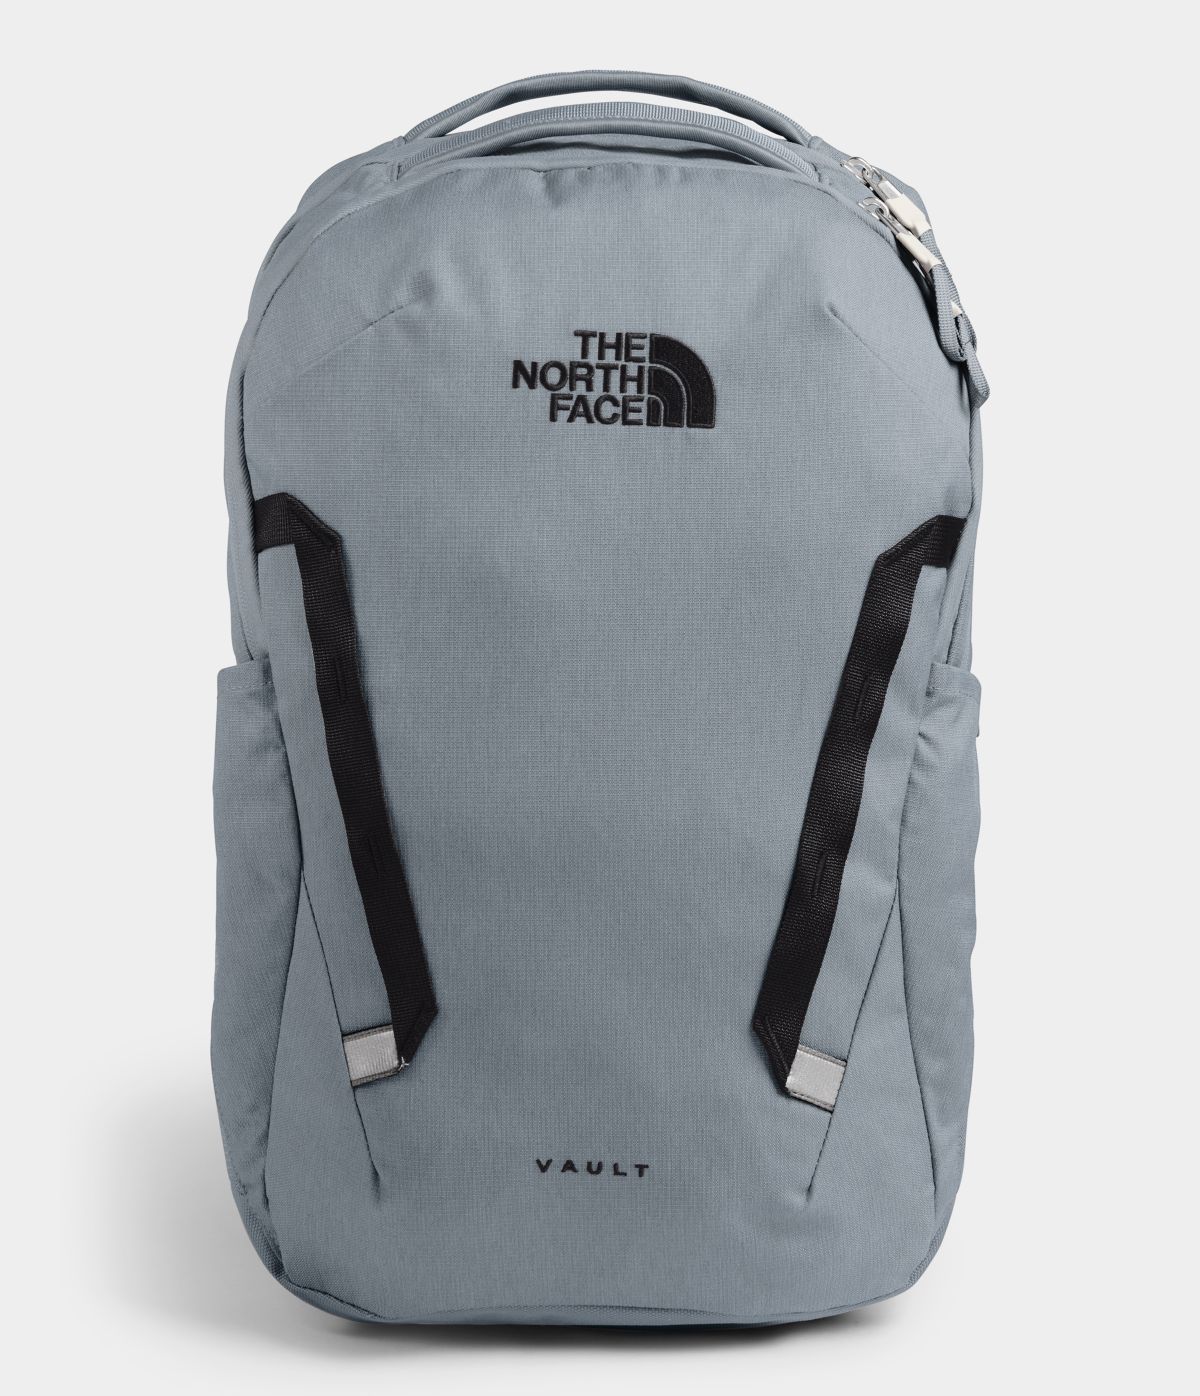 Unisex The North Face Vault Backpack in Mid Grey Dark Heather/TNF Black from front view